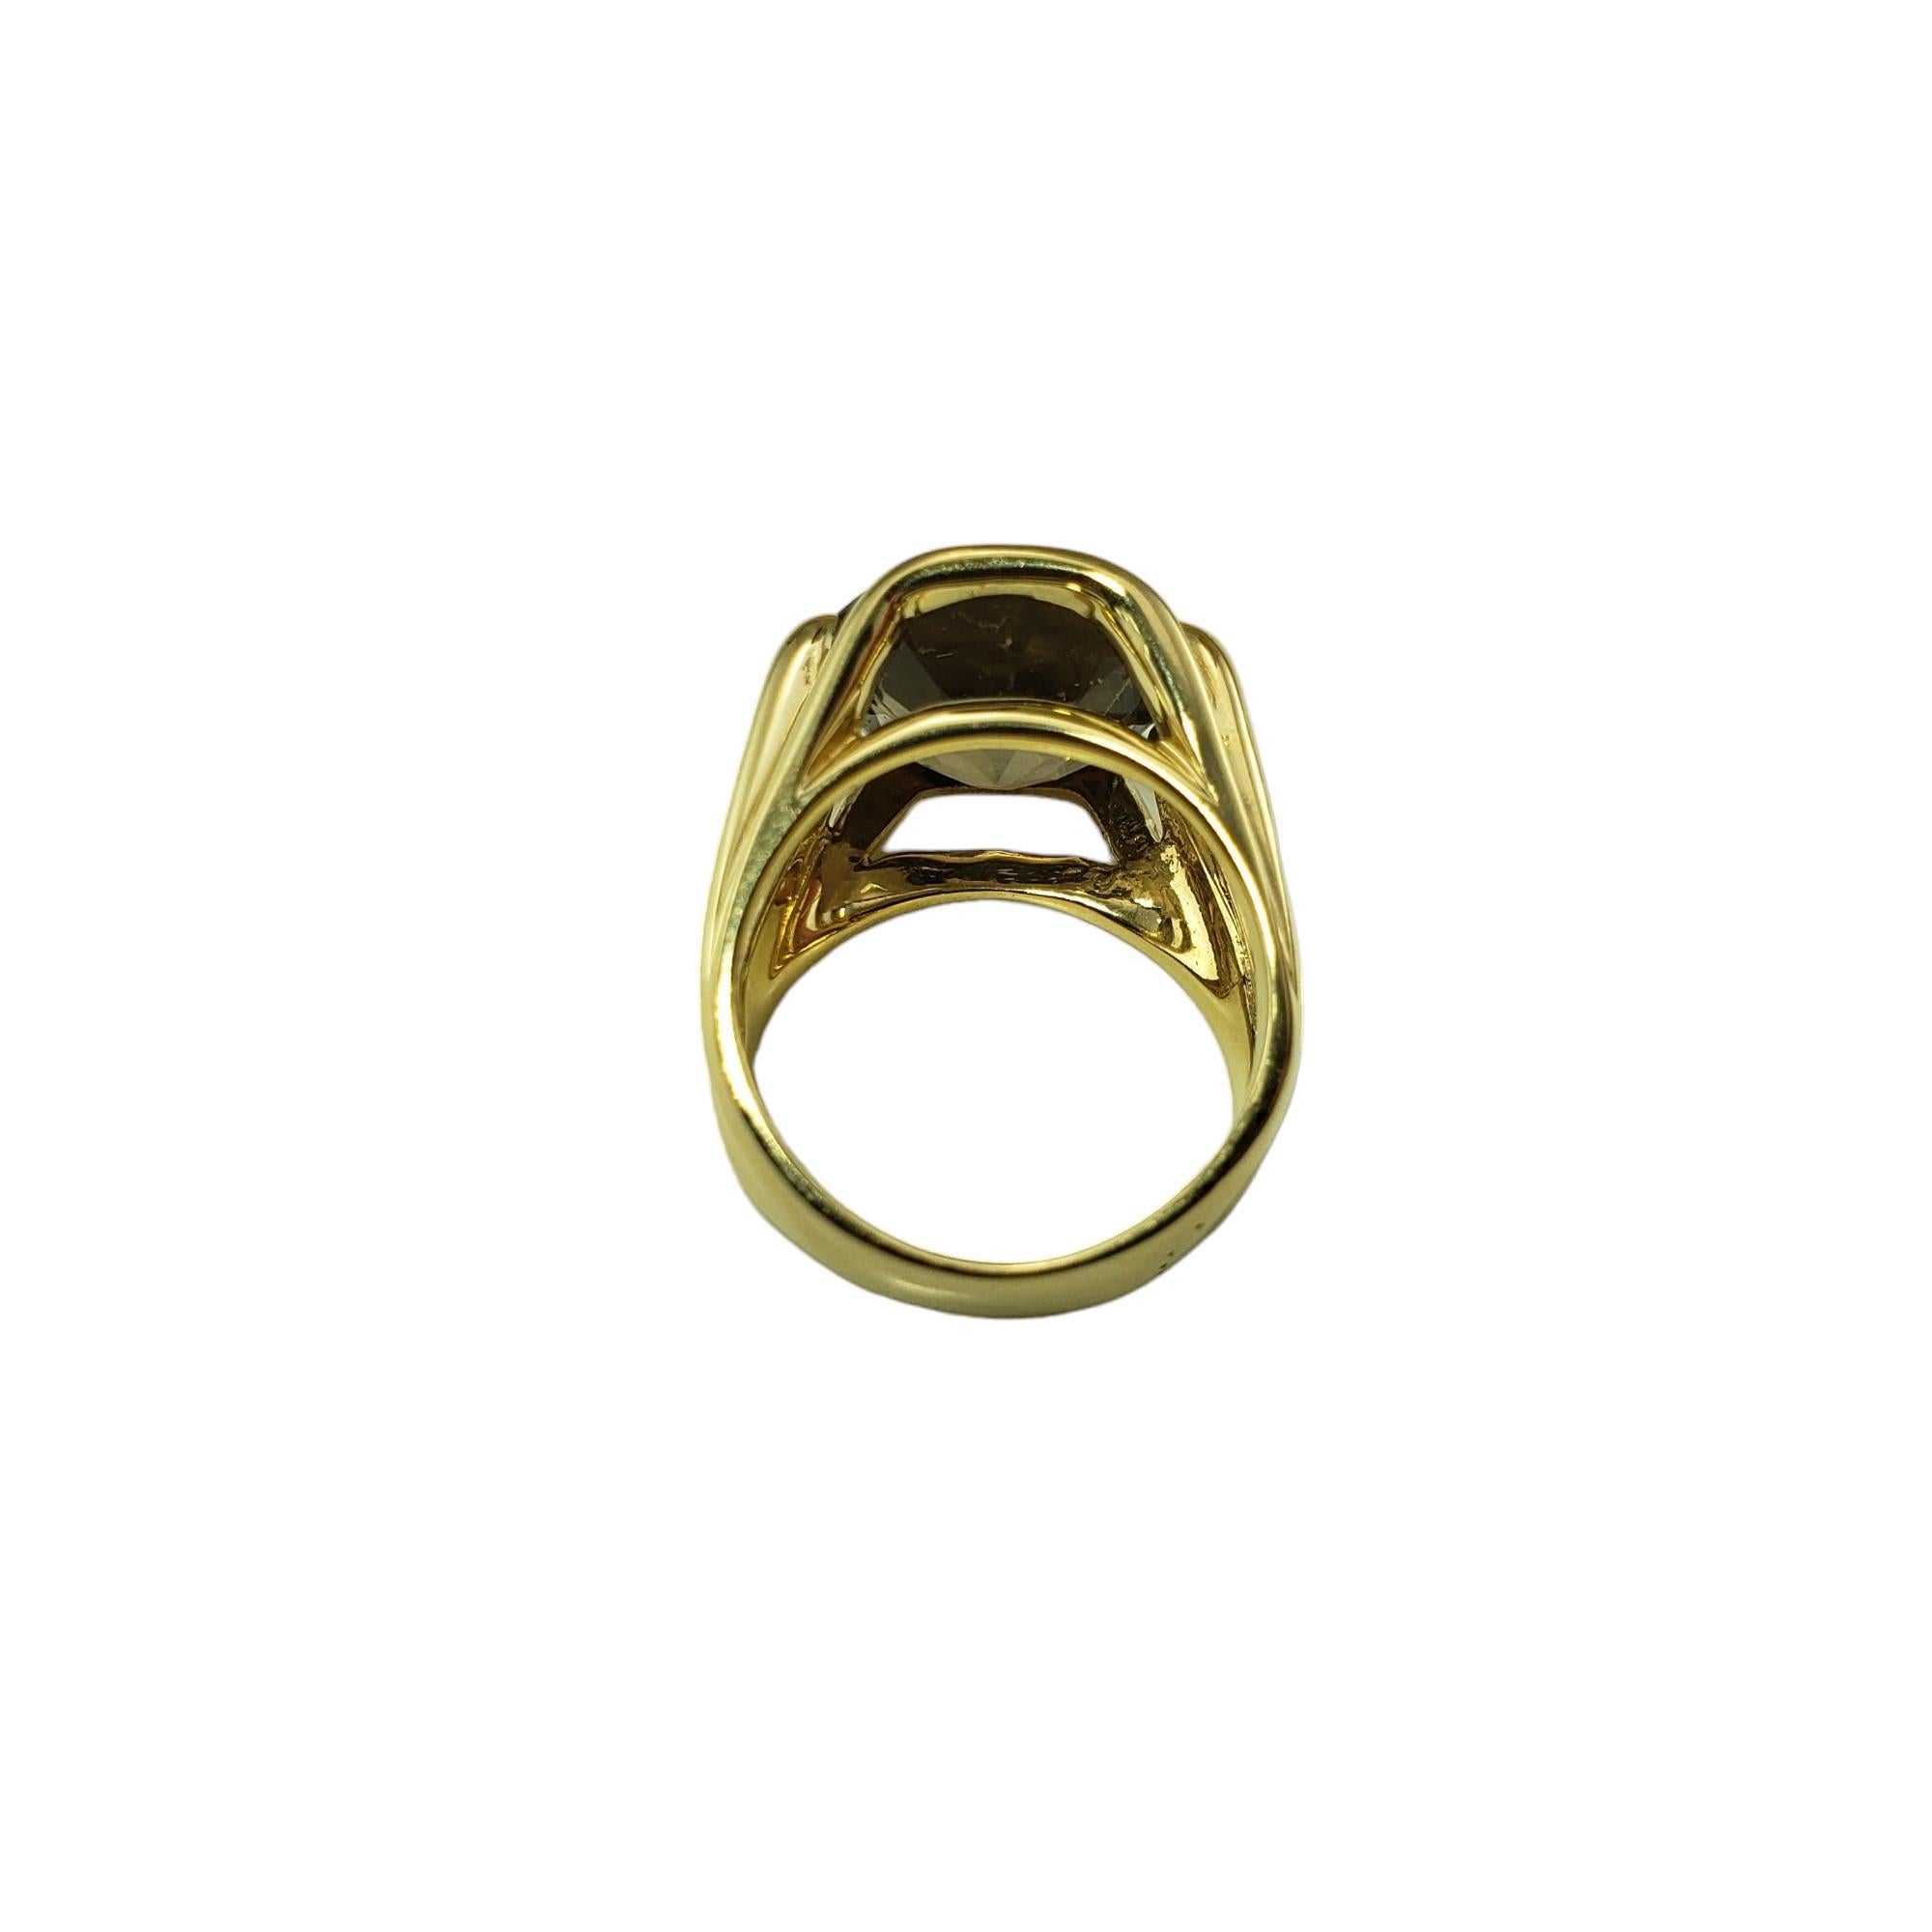  14K Yellow Gold Smoky Quartz Ring Size 8 #15461 In Good Condition For Sale In Washington Depot, CT